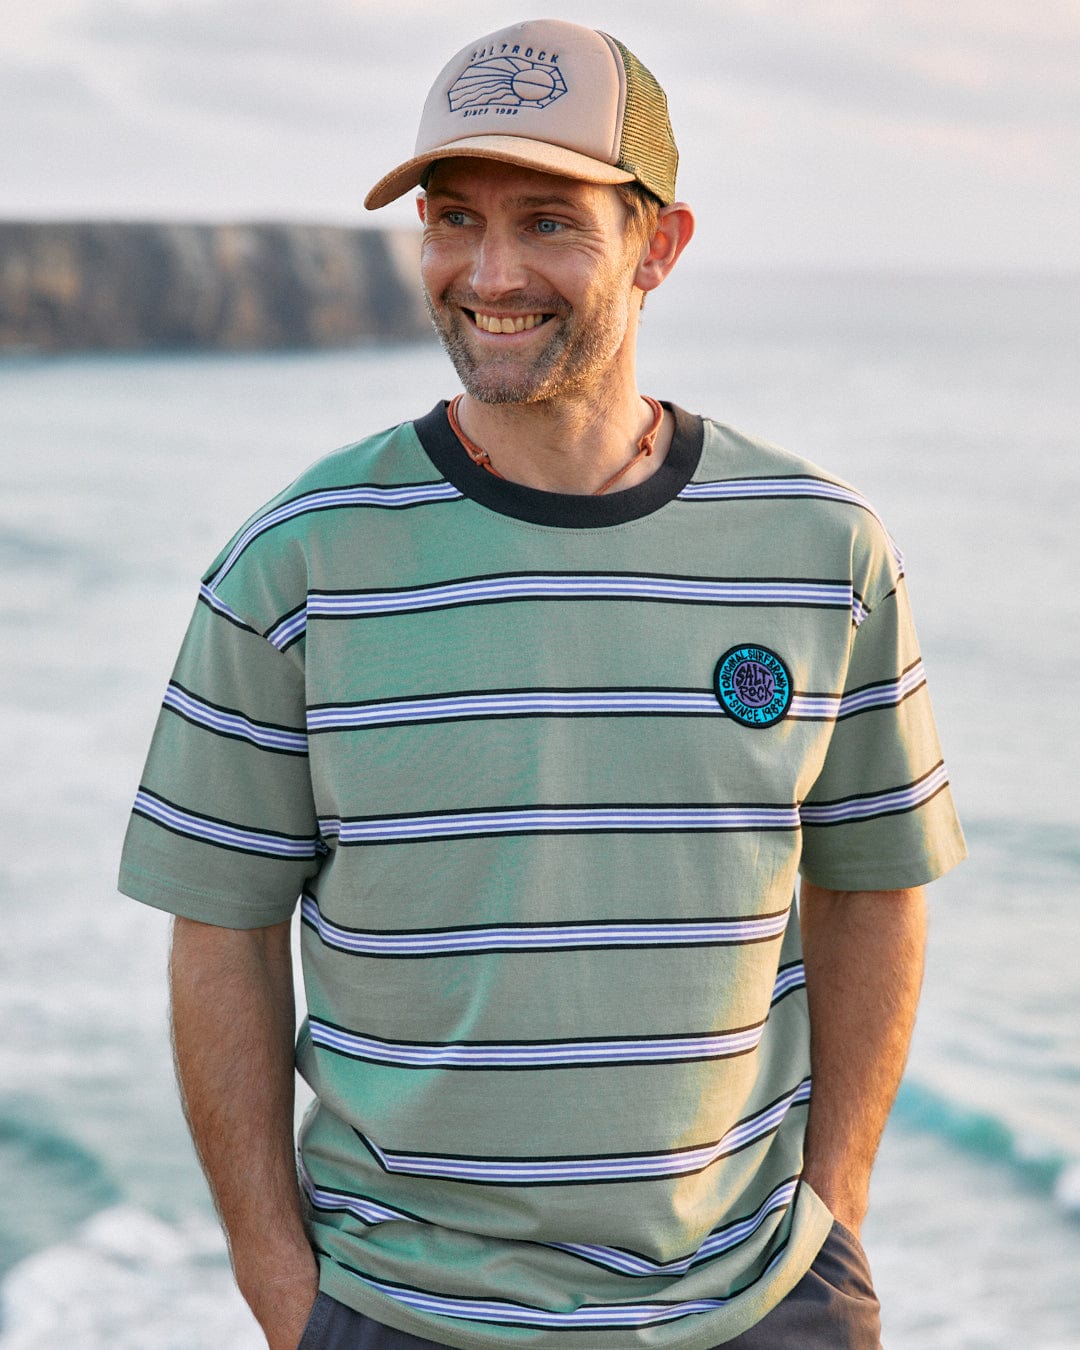 Man in a striped shirt with Saltrock's SR Original - Mens Short Sleeve T-Shirt - Green and cap smiling by the sea.